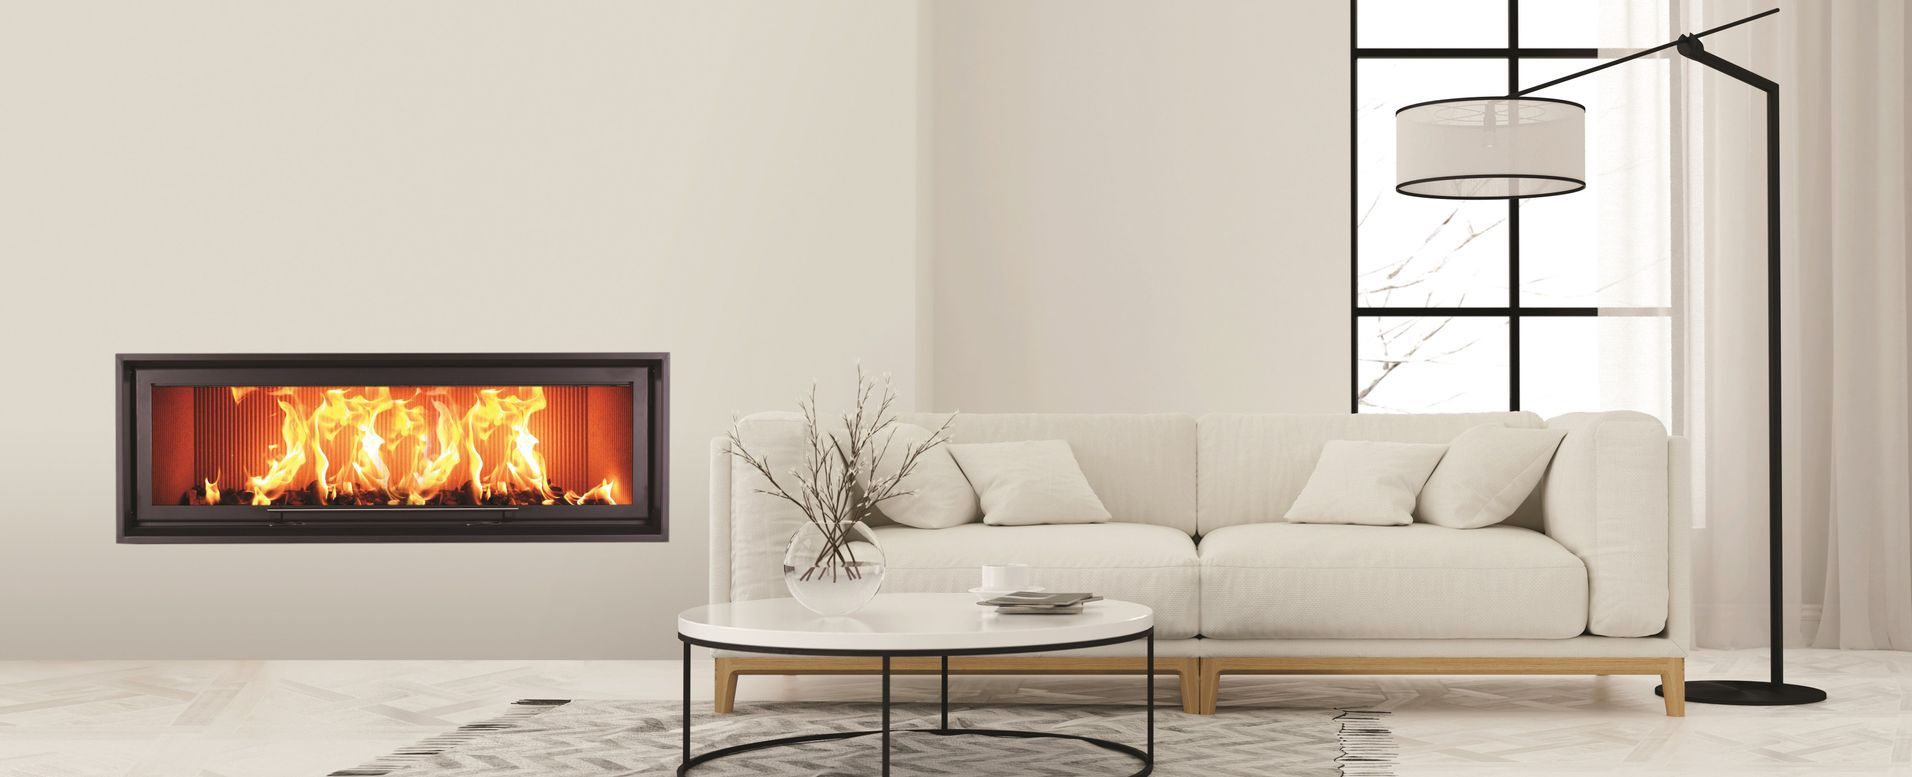 Maison Fireplaces Banner image